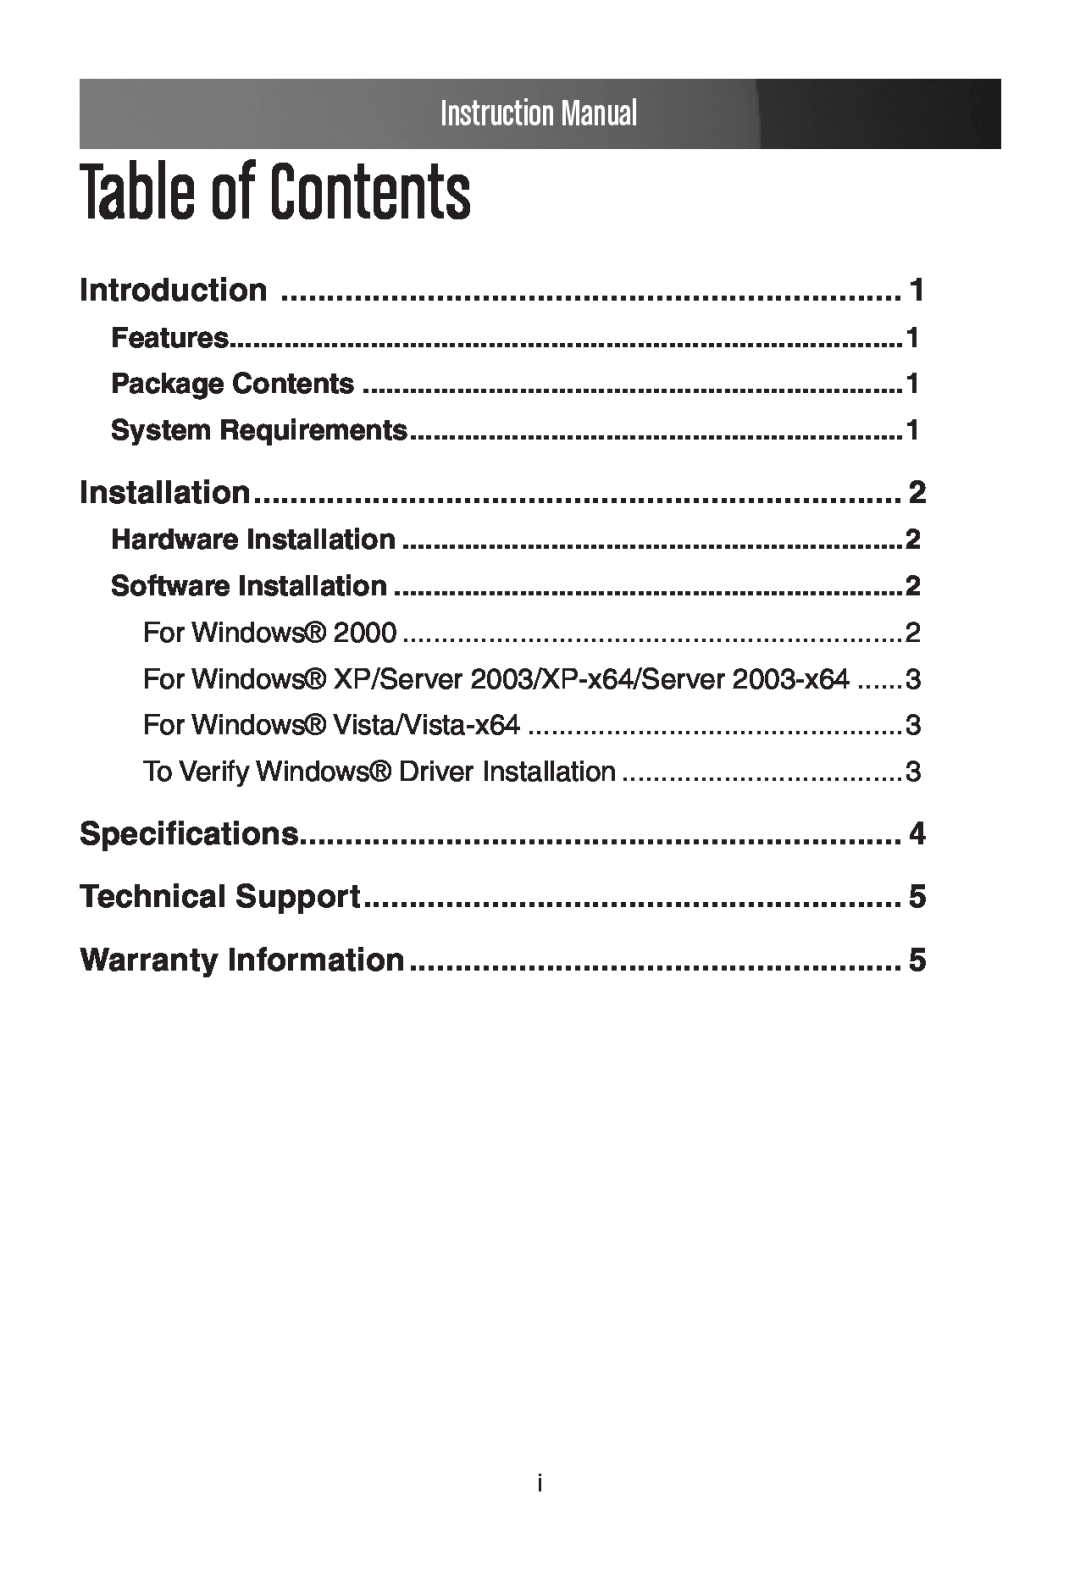 StarTech.com PEX1P Instruction Manual, Features, Package Contents, Hardware Installation, Software Installation 